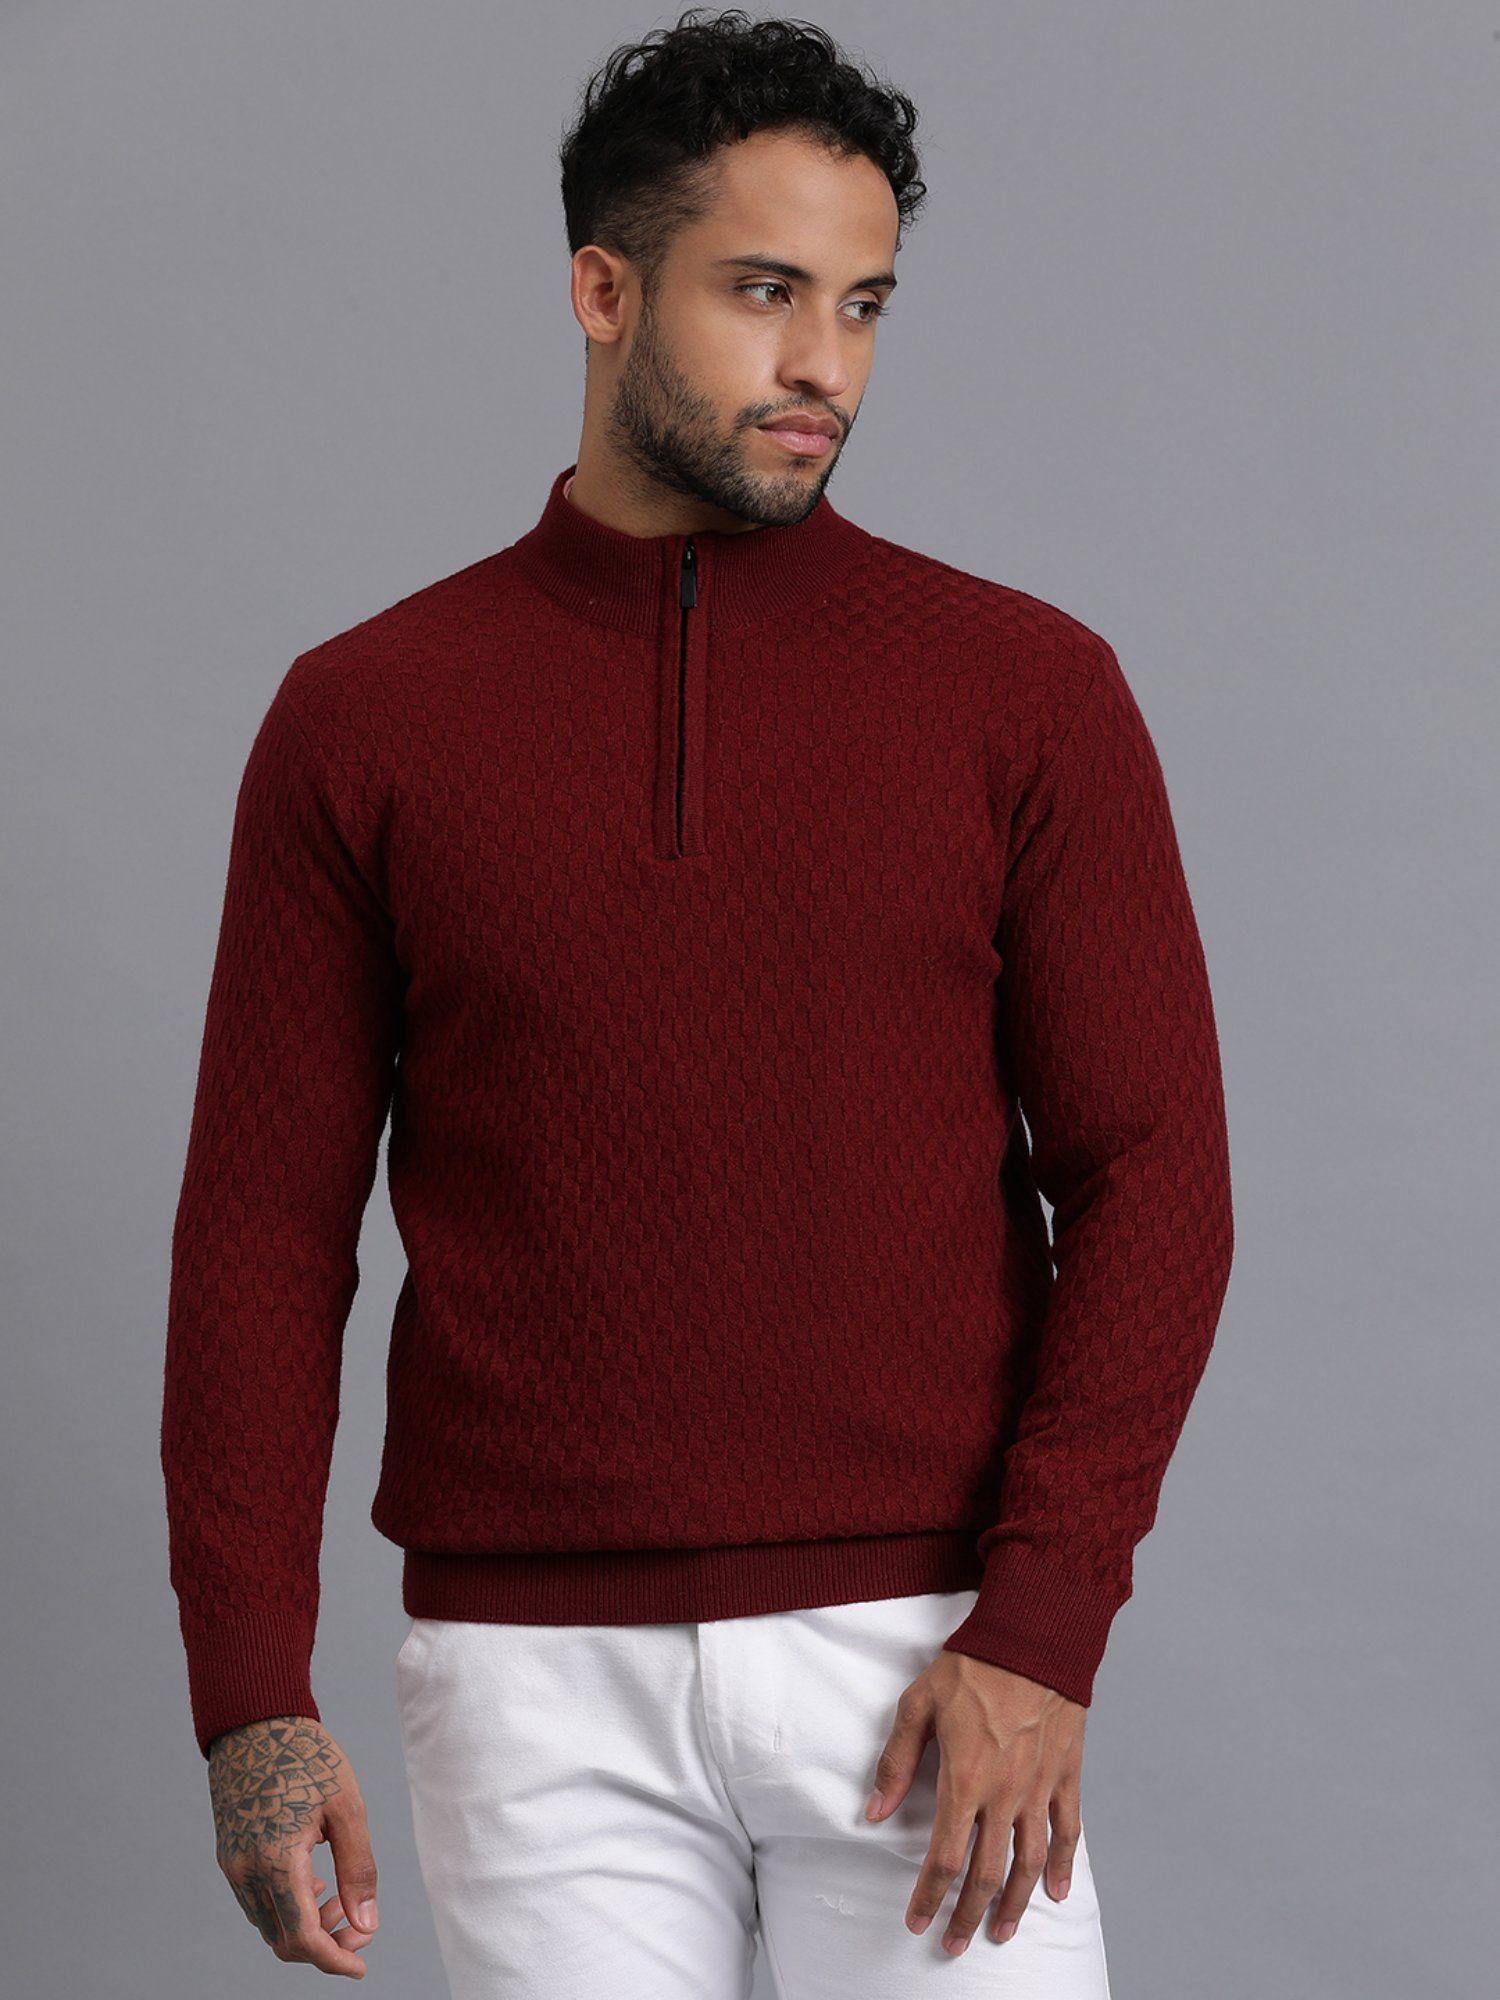 wine half zipper luxury cable knitted mens wool pullover sweater